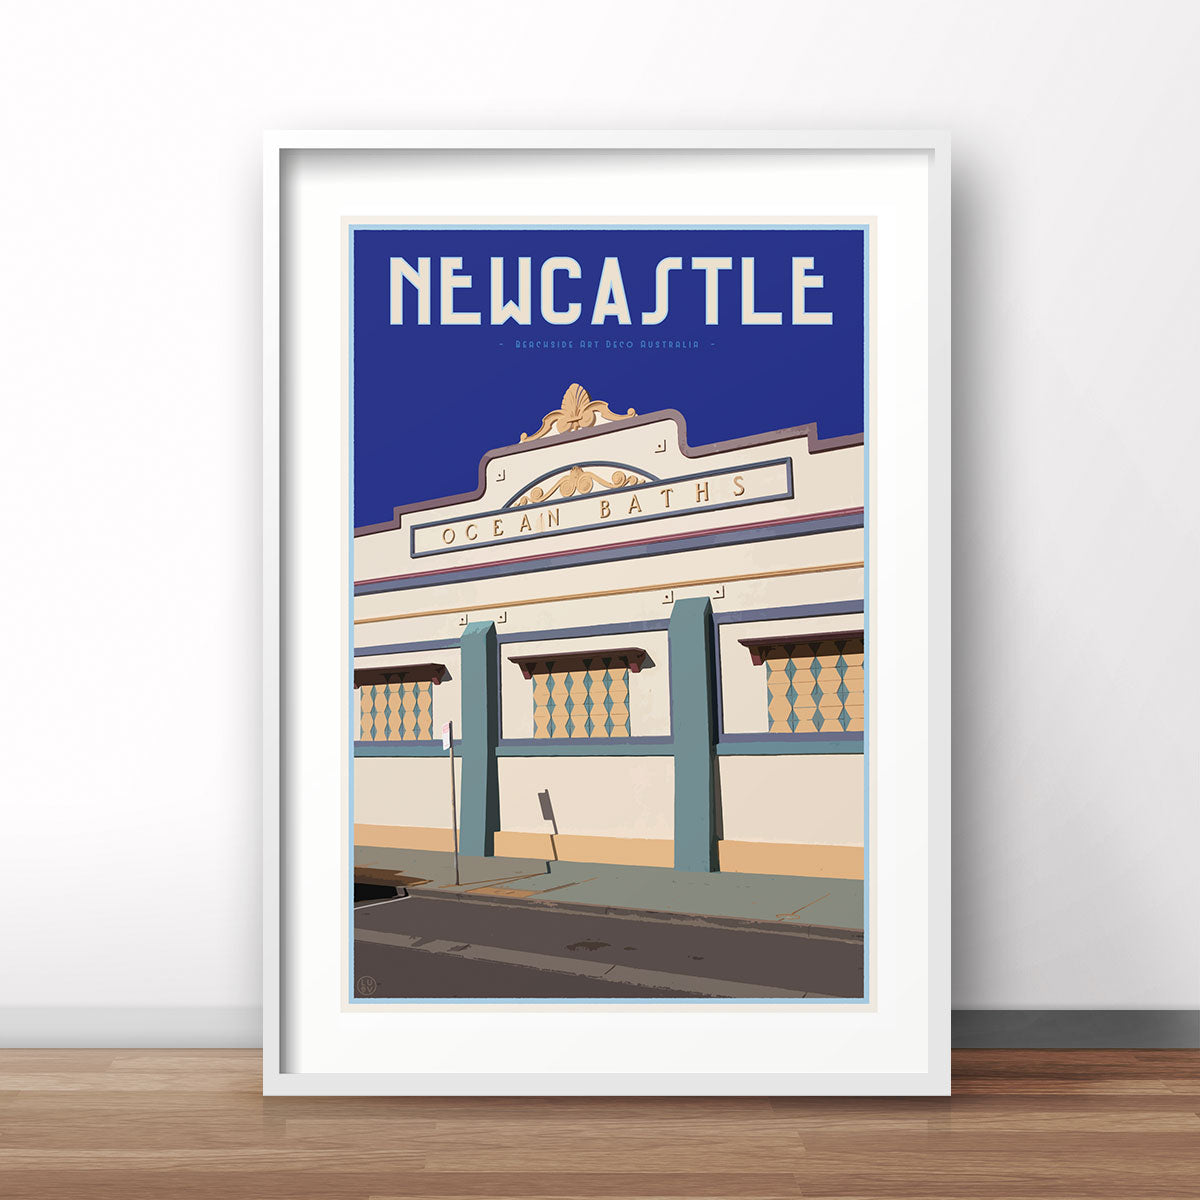 Vintage travel style poster of Newcastle Baths by Places We Luv